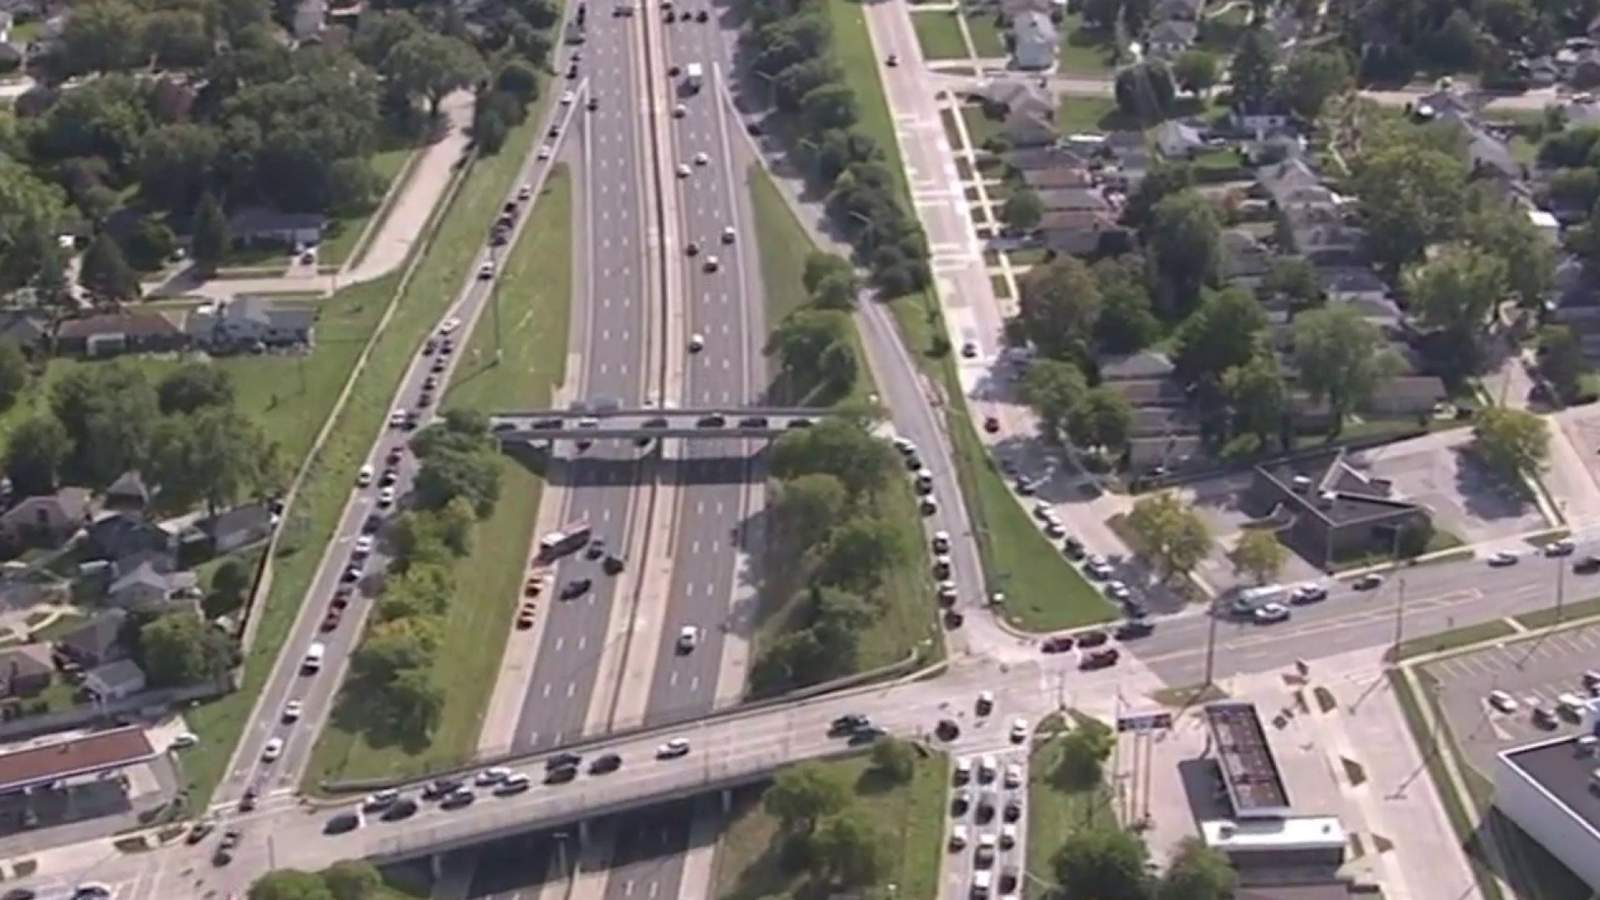 Construction worker killed in hit-and-run on I-94 in St. Clair Shores, police say